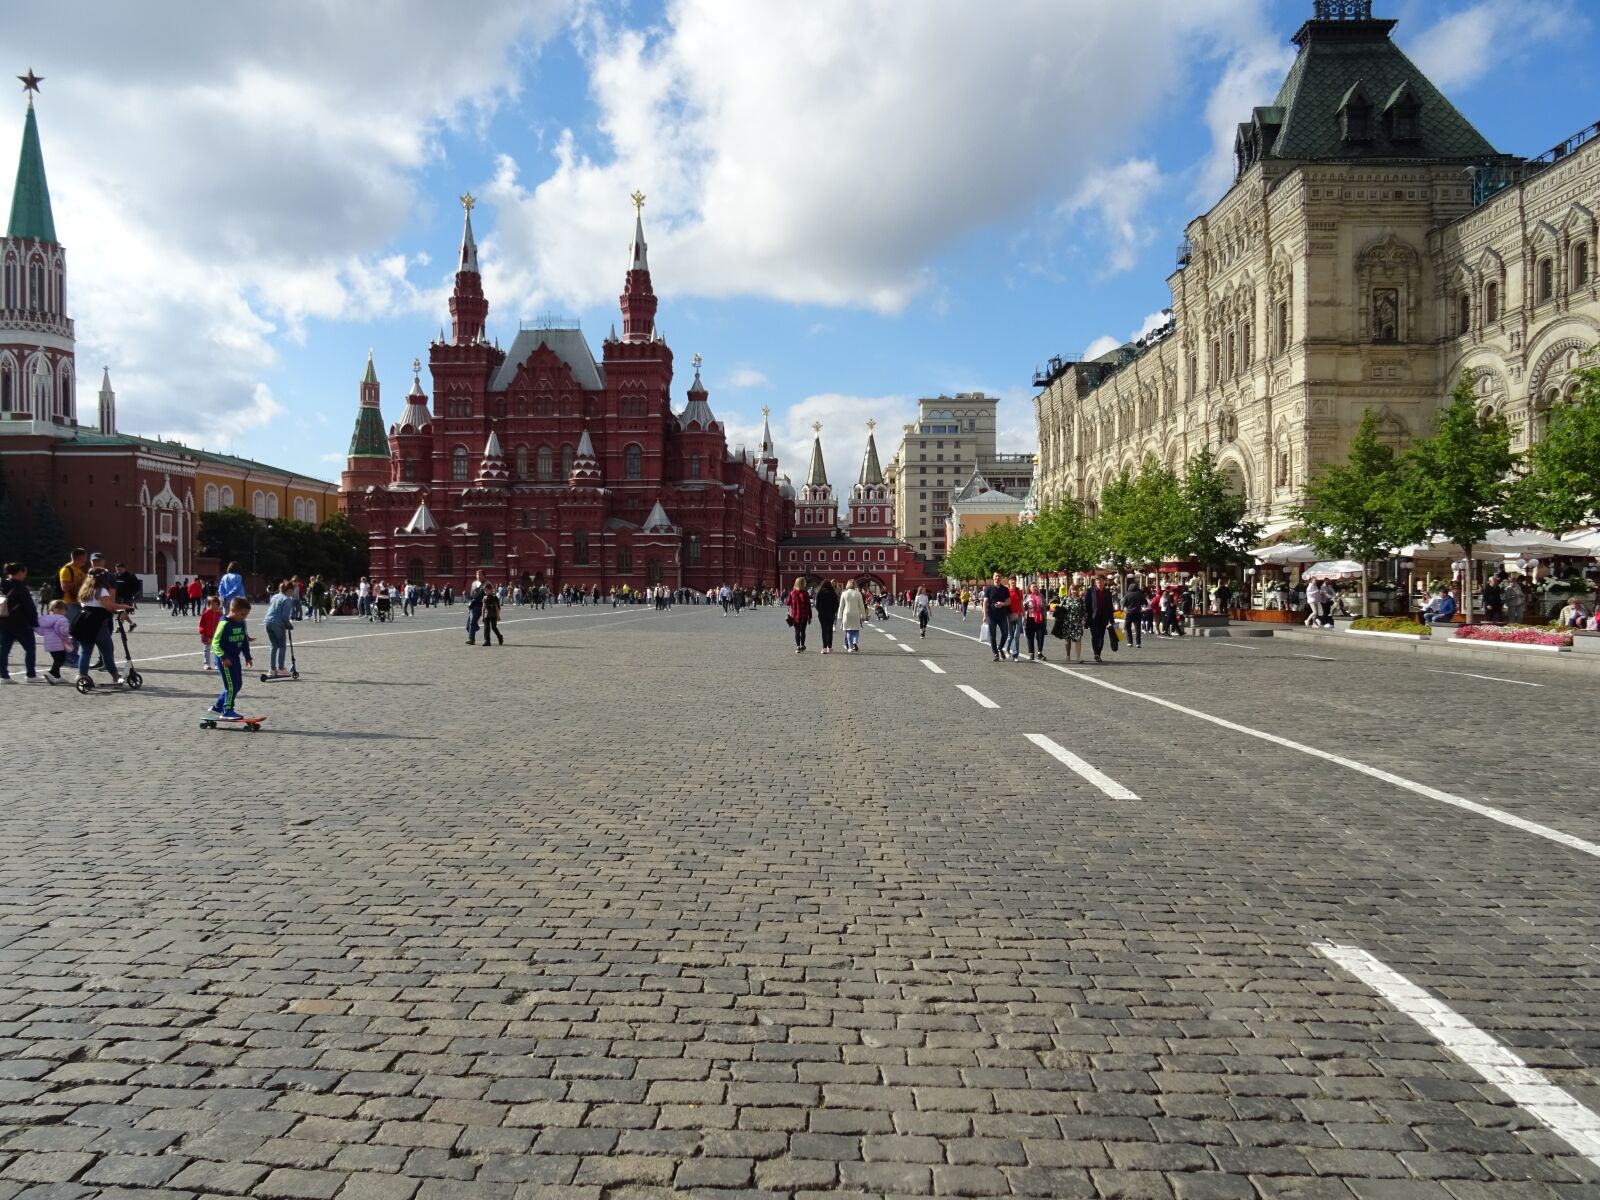 Sony DSC-HX60 sample photo. Paving stone, red square photography